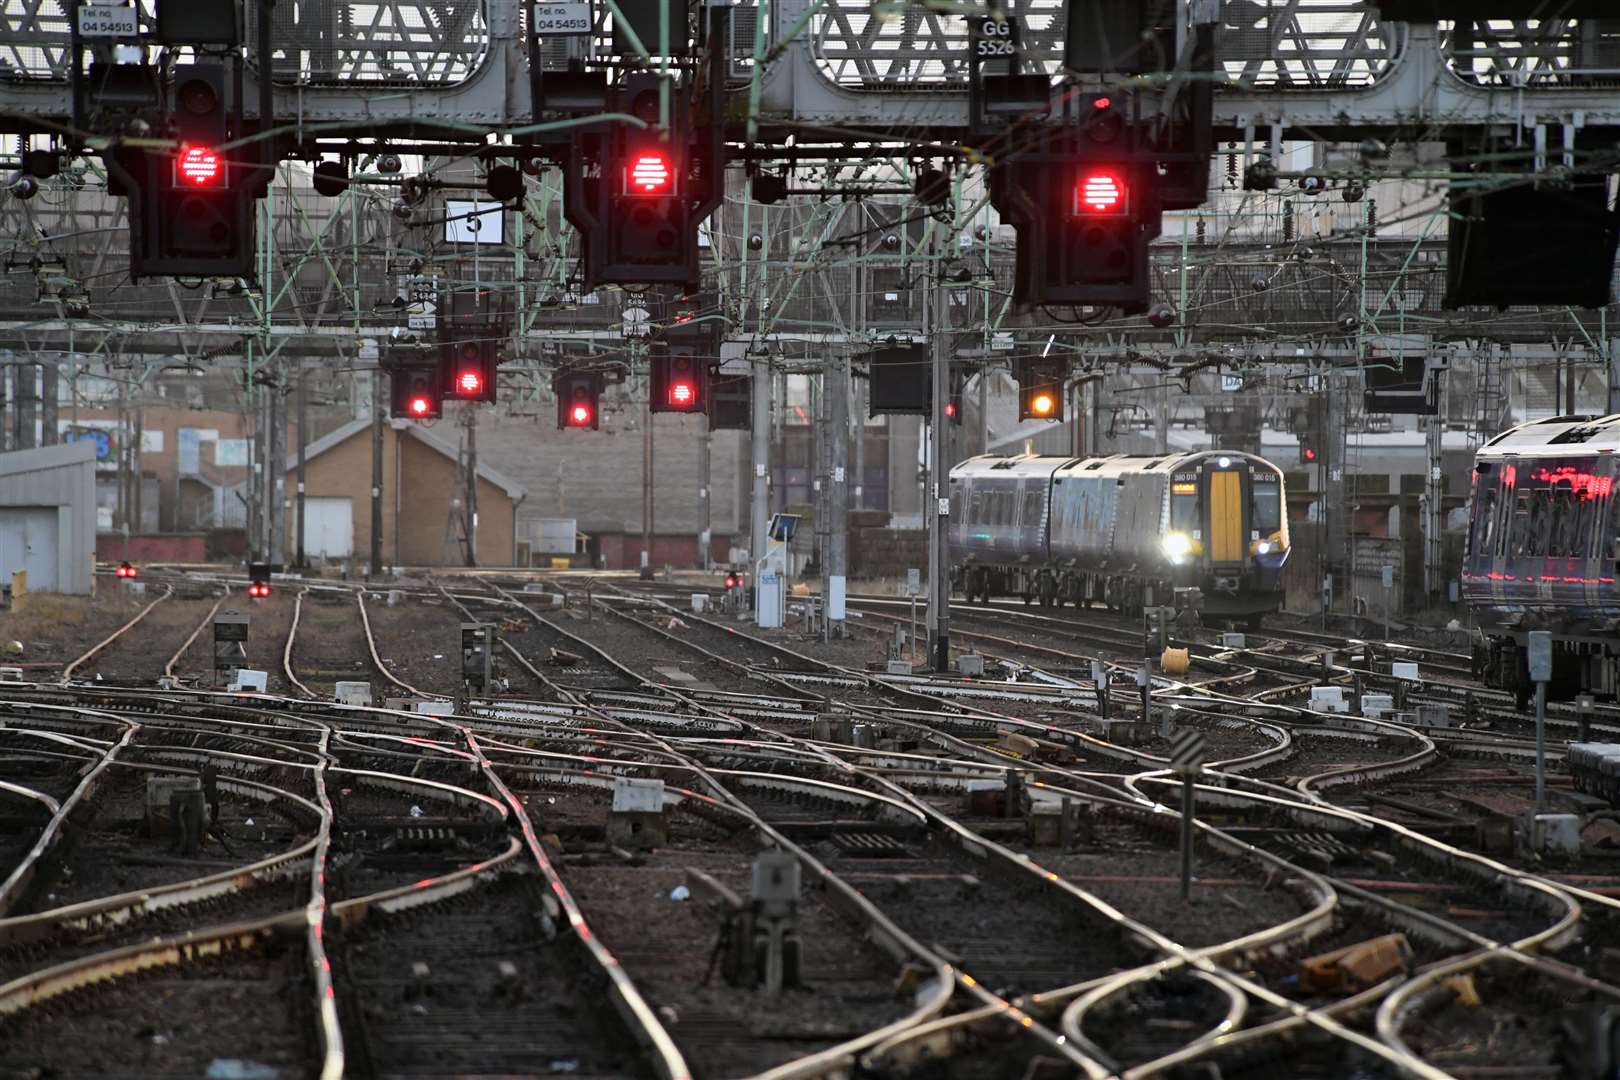 The timetable for rail services across the UK will be severely curtailed during the start of the new year because of the continuing dispute between rail operators and railway workers unions.